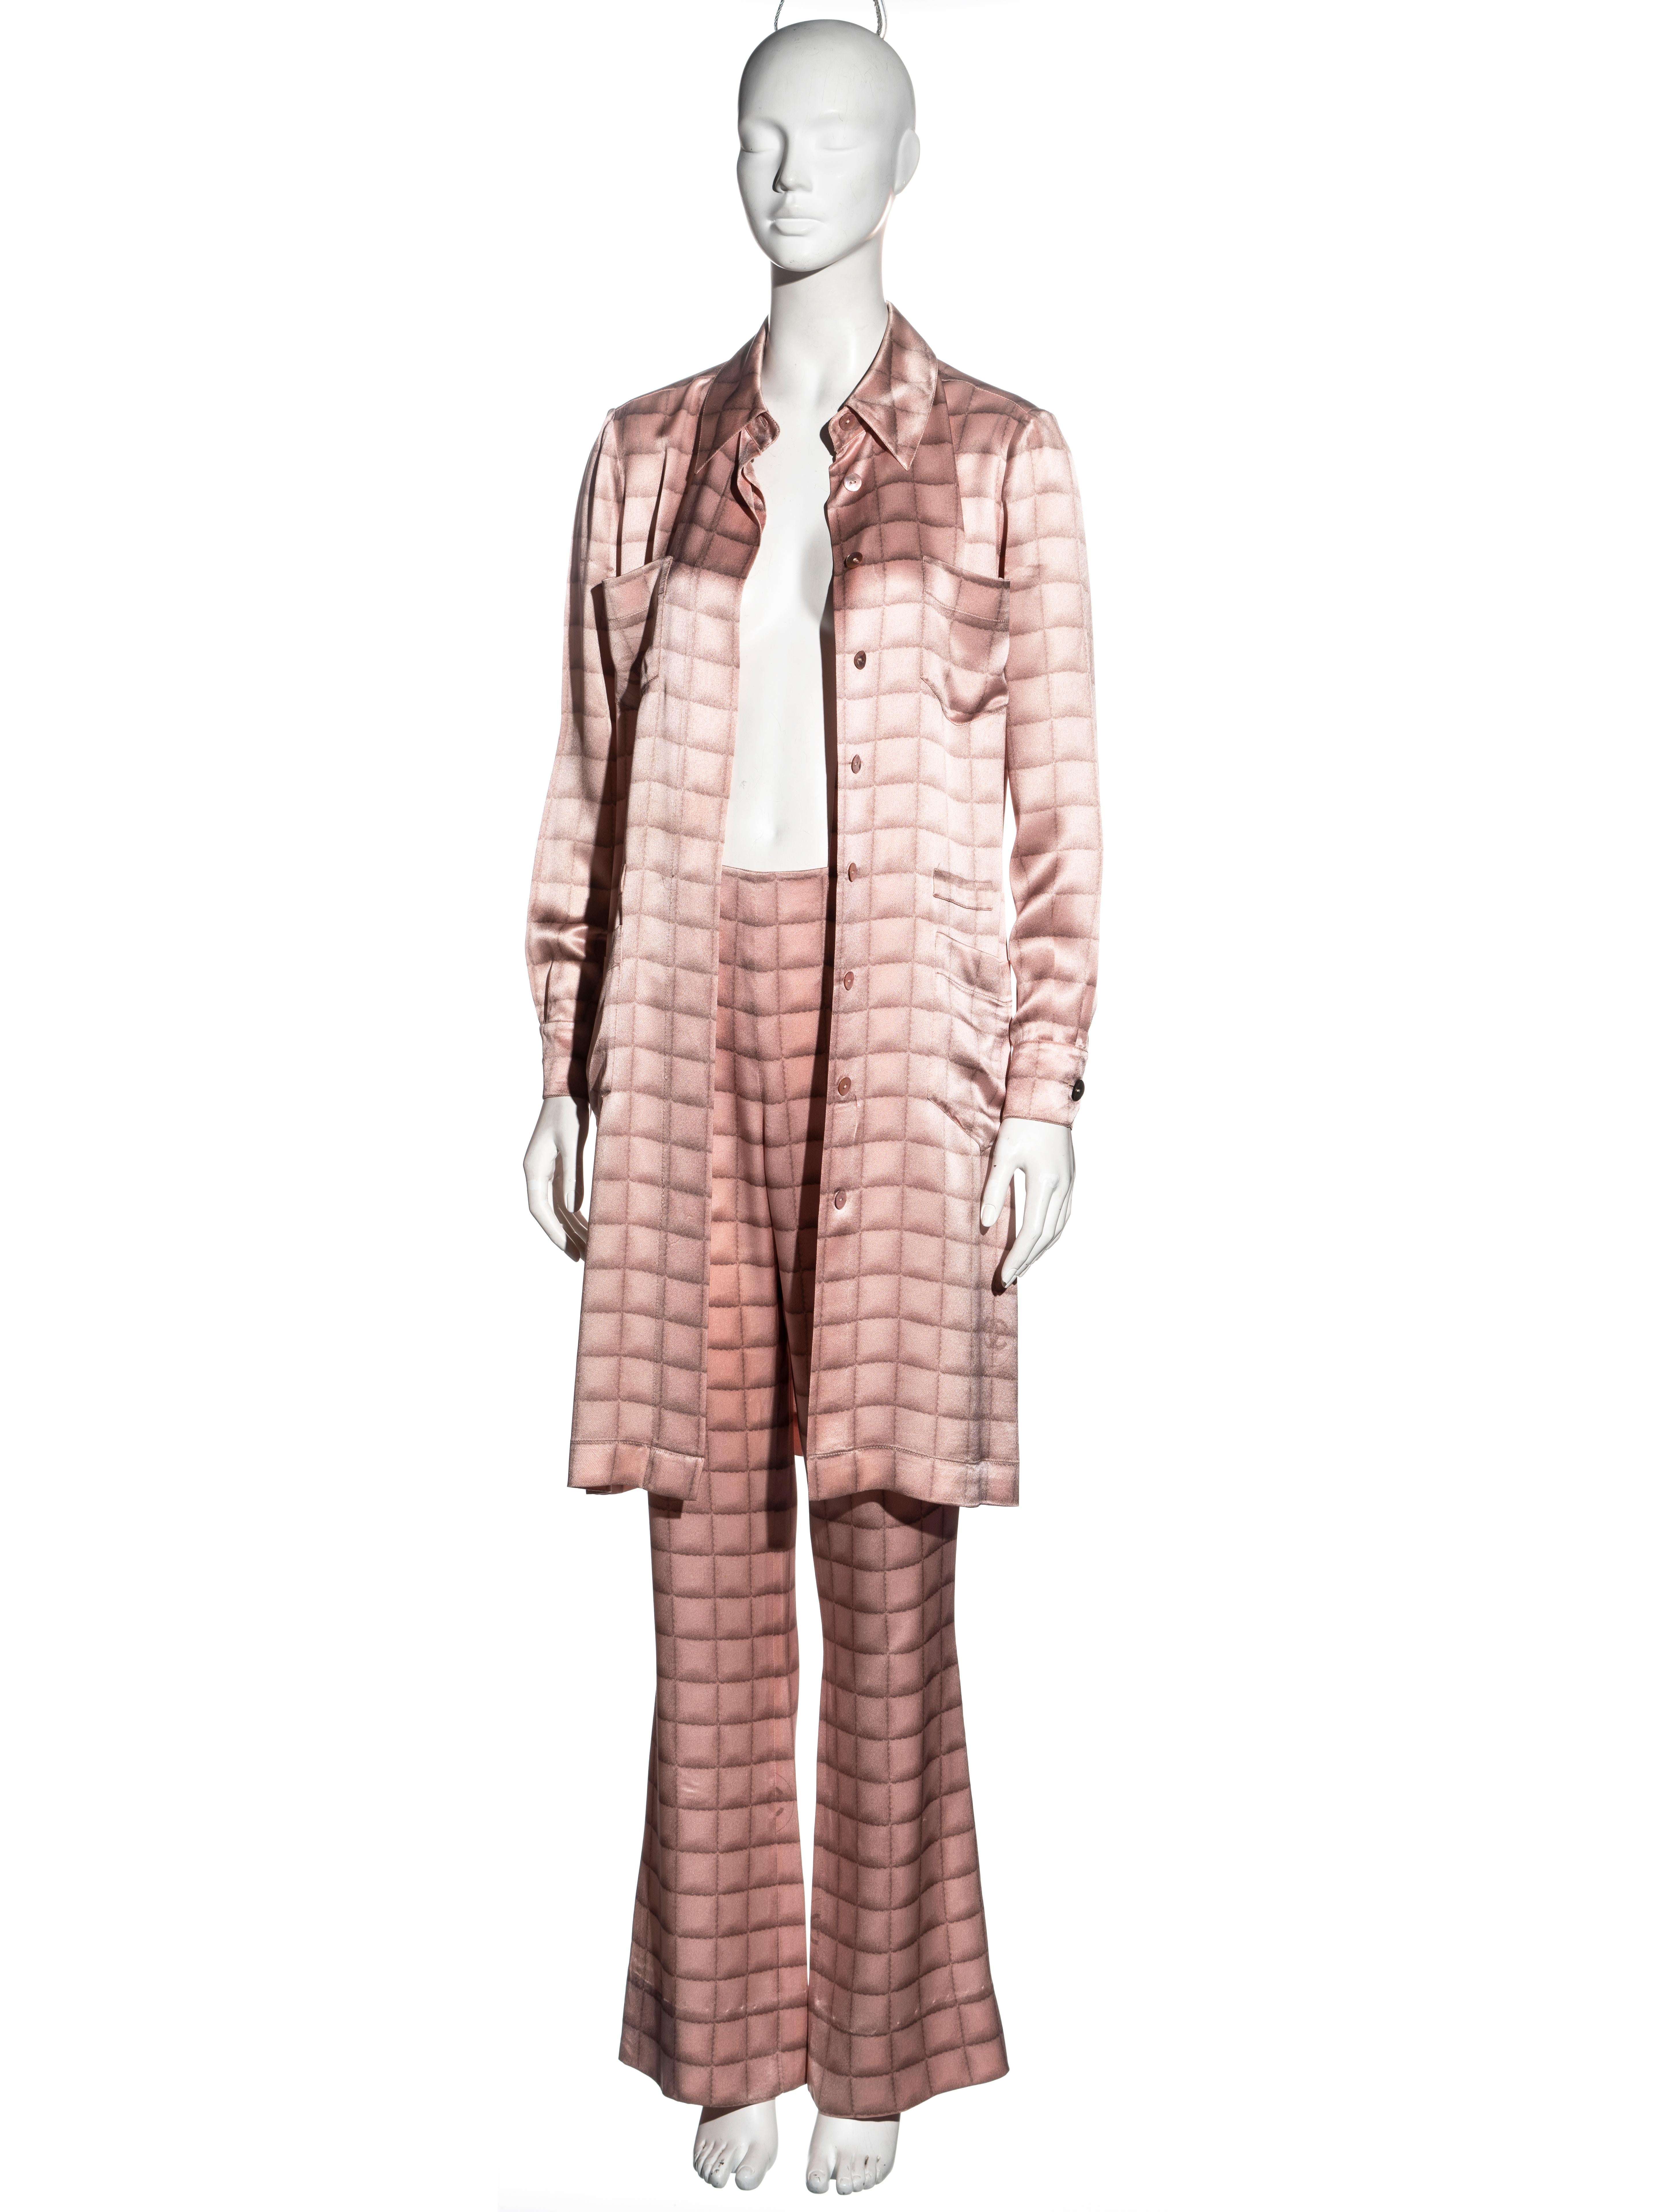 Beige Chanel by Karl Lagerfeld pink silk shirt dress and pants suit, fw 2000